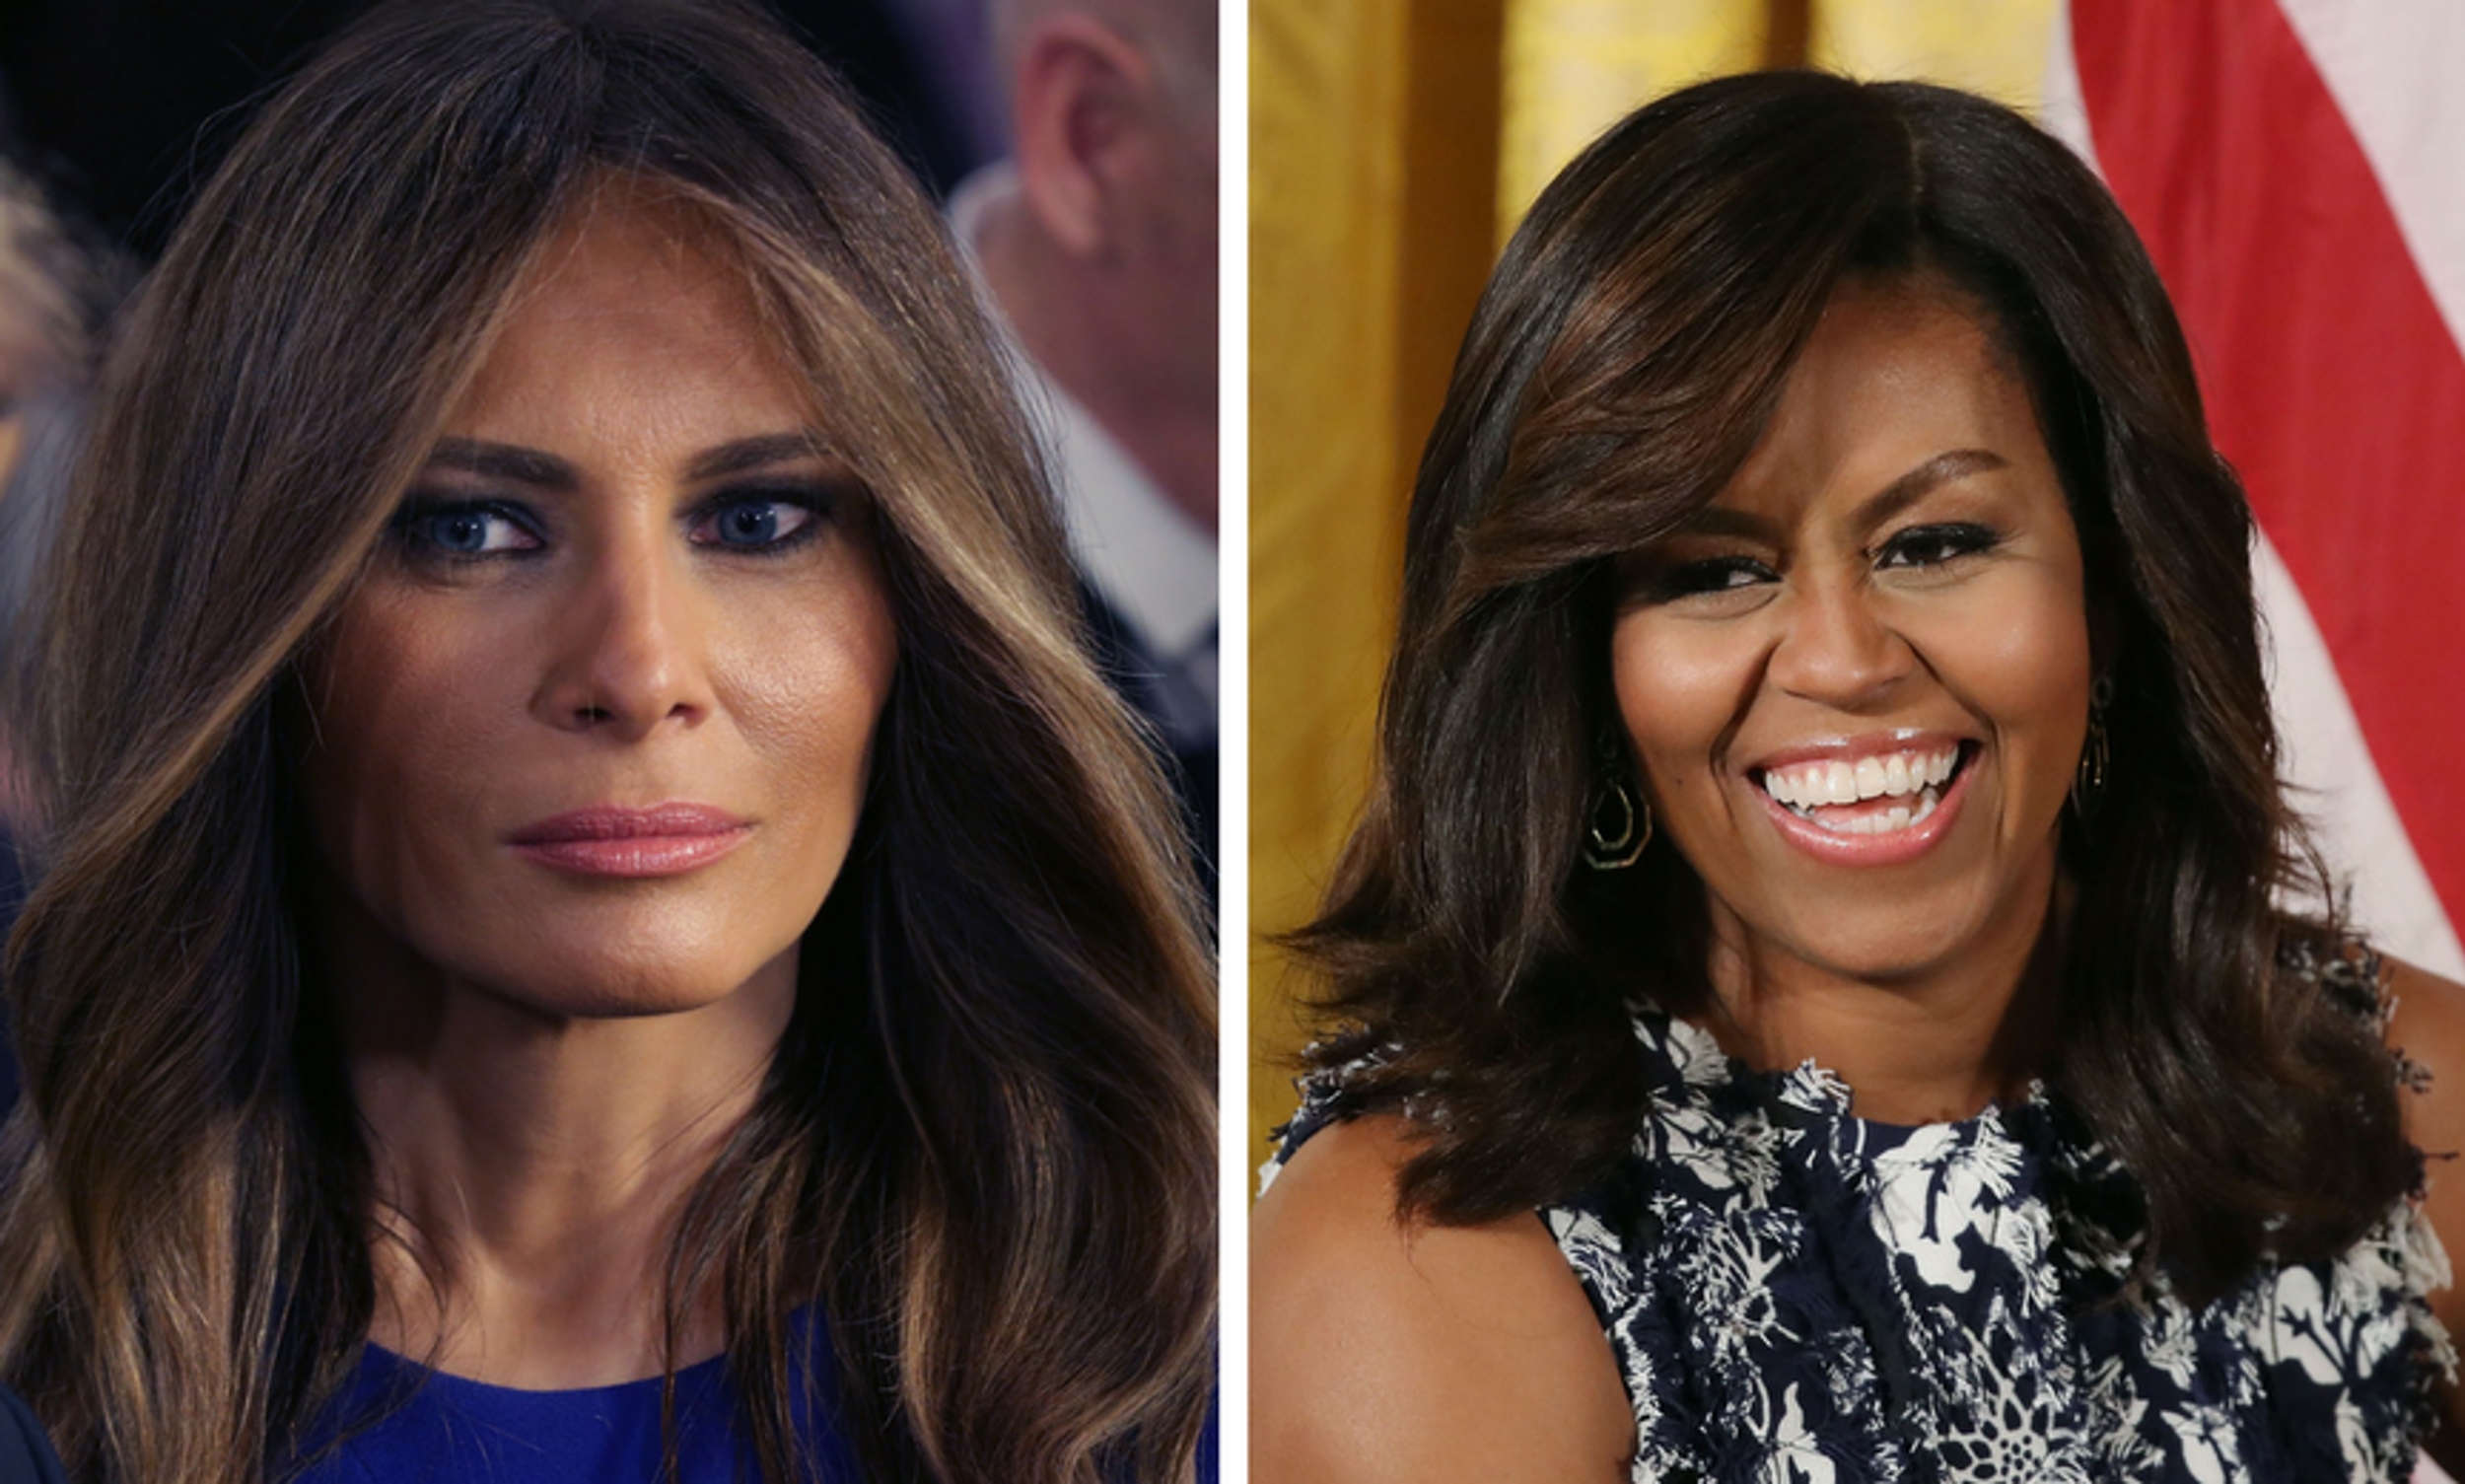 Melania Trump Just Unveiled Her New White House Initiative, and She's Being Accused of Stealing From Michelle Obama Again